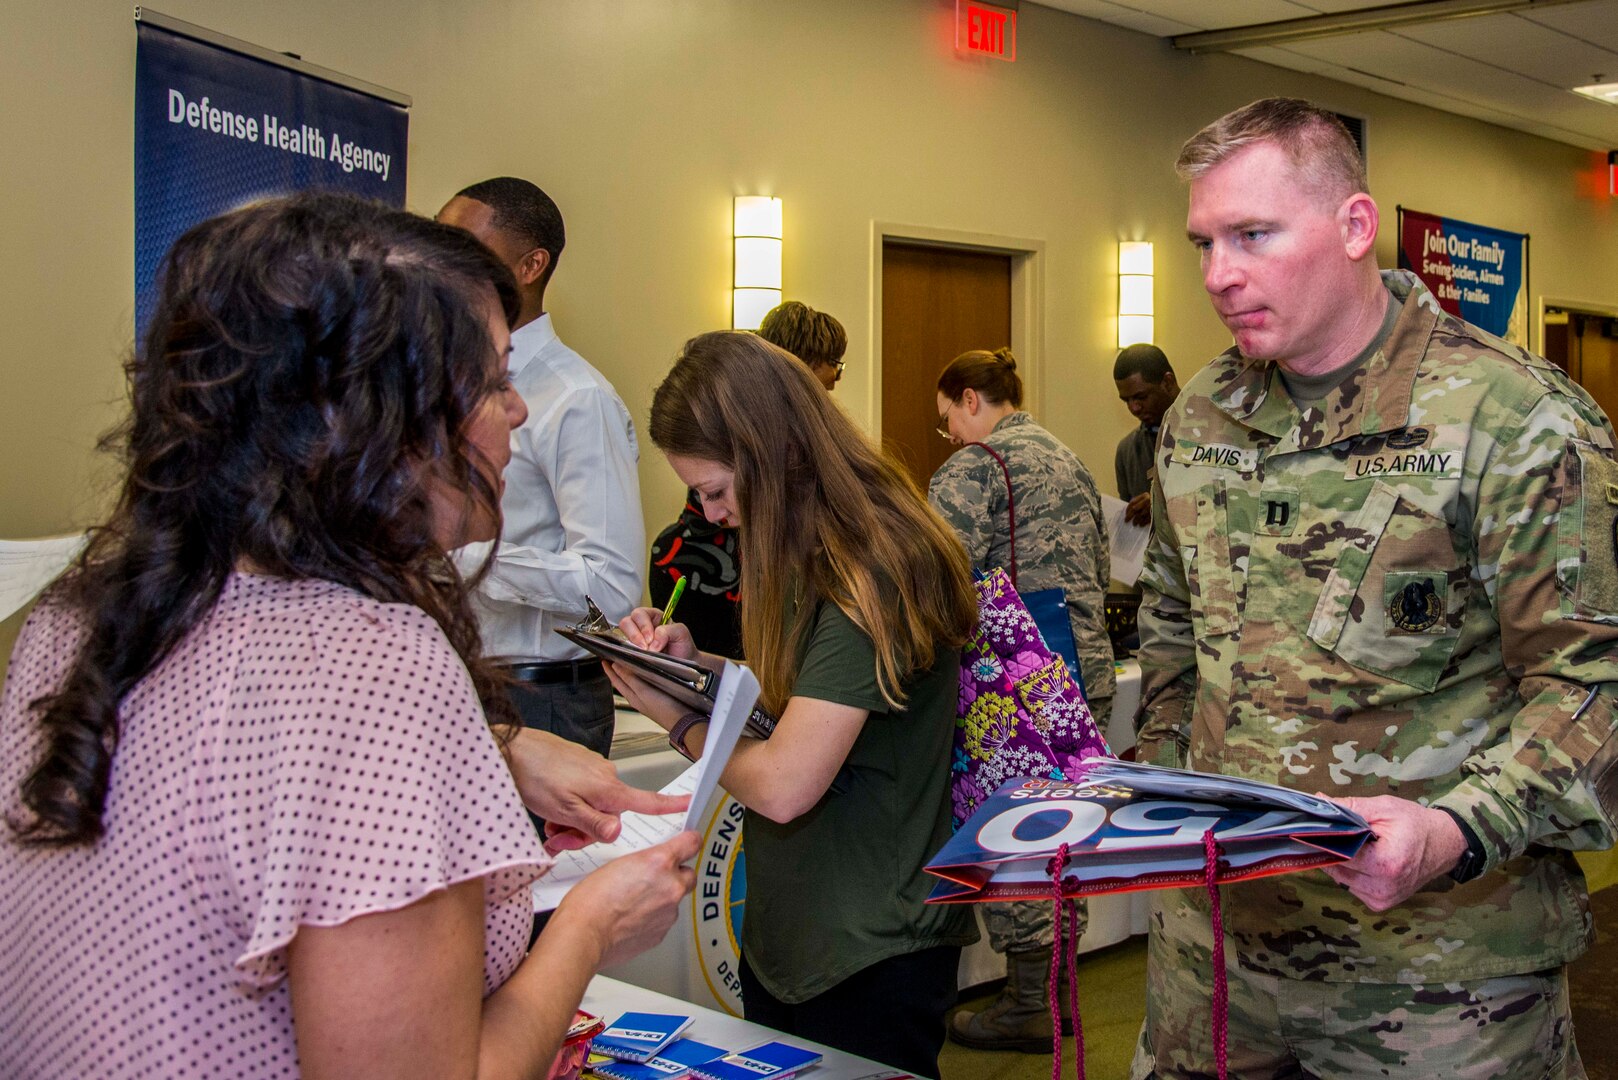 Hundreds of job seekers visited, explored career options with and handed out resumes to Department of Defense employers at the Hiring Heroes Career Fair held in the Sam Houston Community Center at Joint Base San Antonio-Fort Sam Houston March 20.